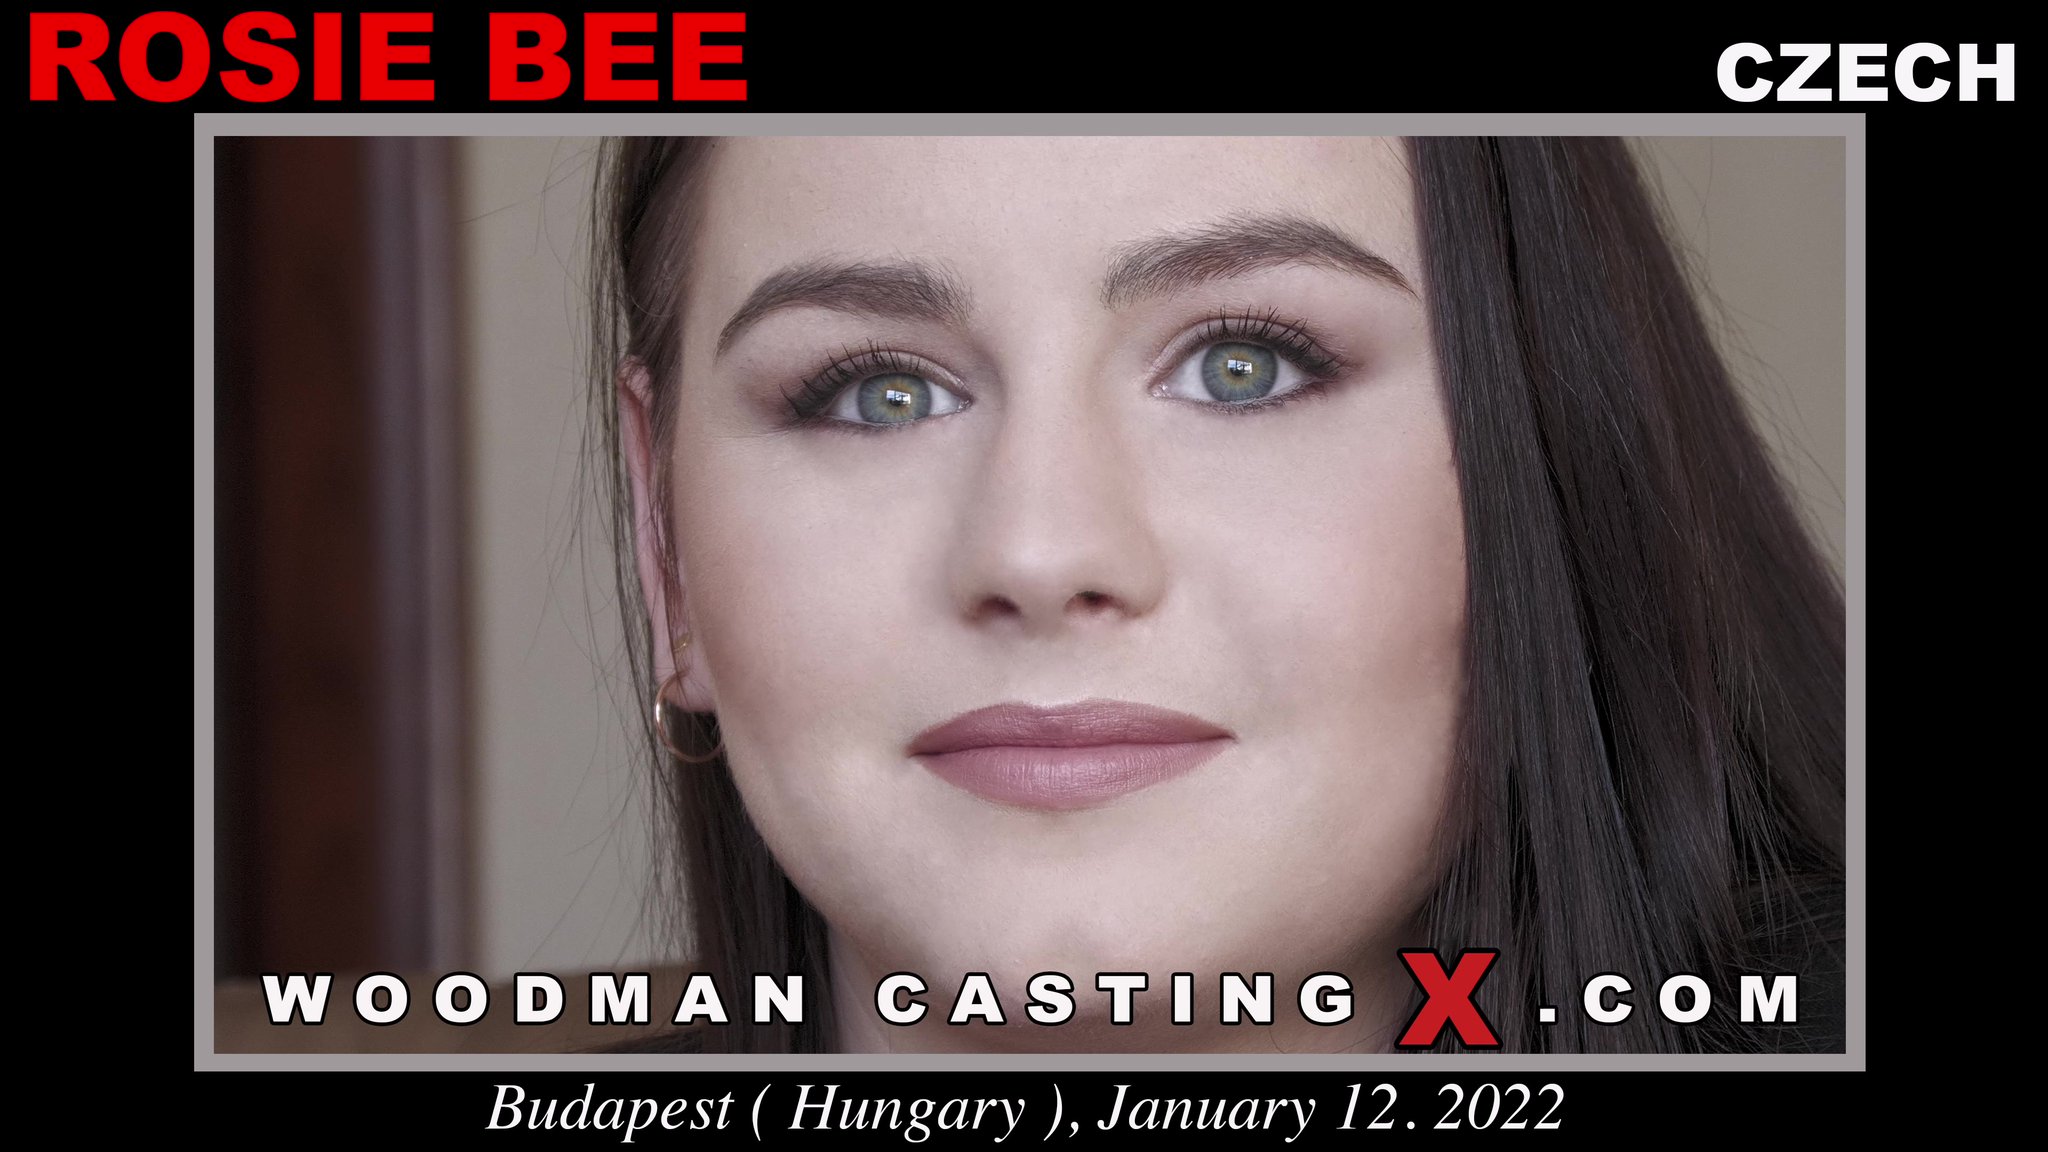 Woodman Casting X on Twitter: "New Video Rosie Bee https://t.co/e9QuXB...